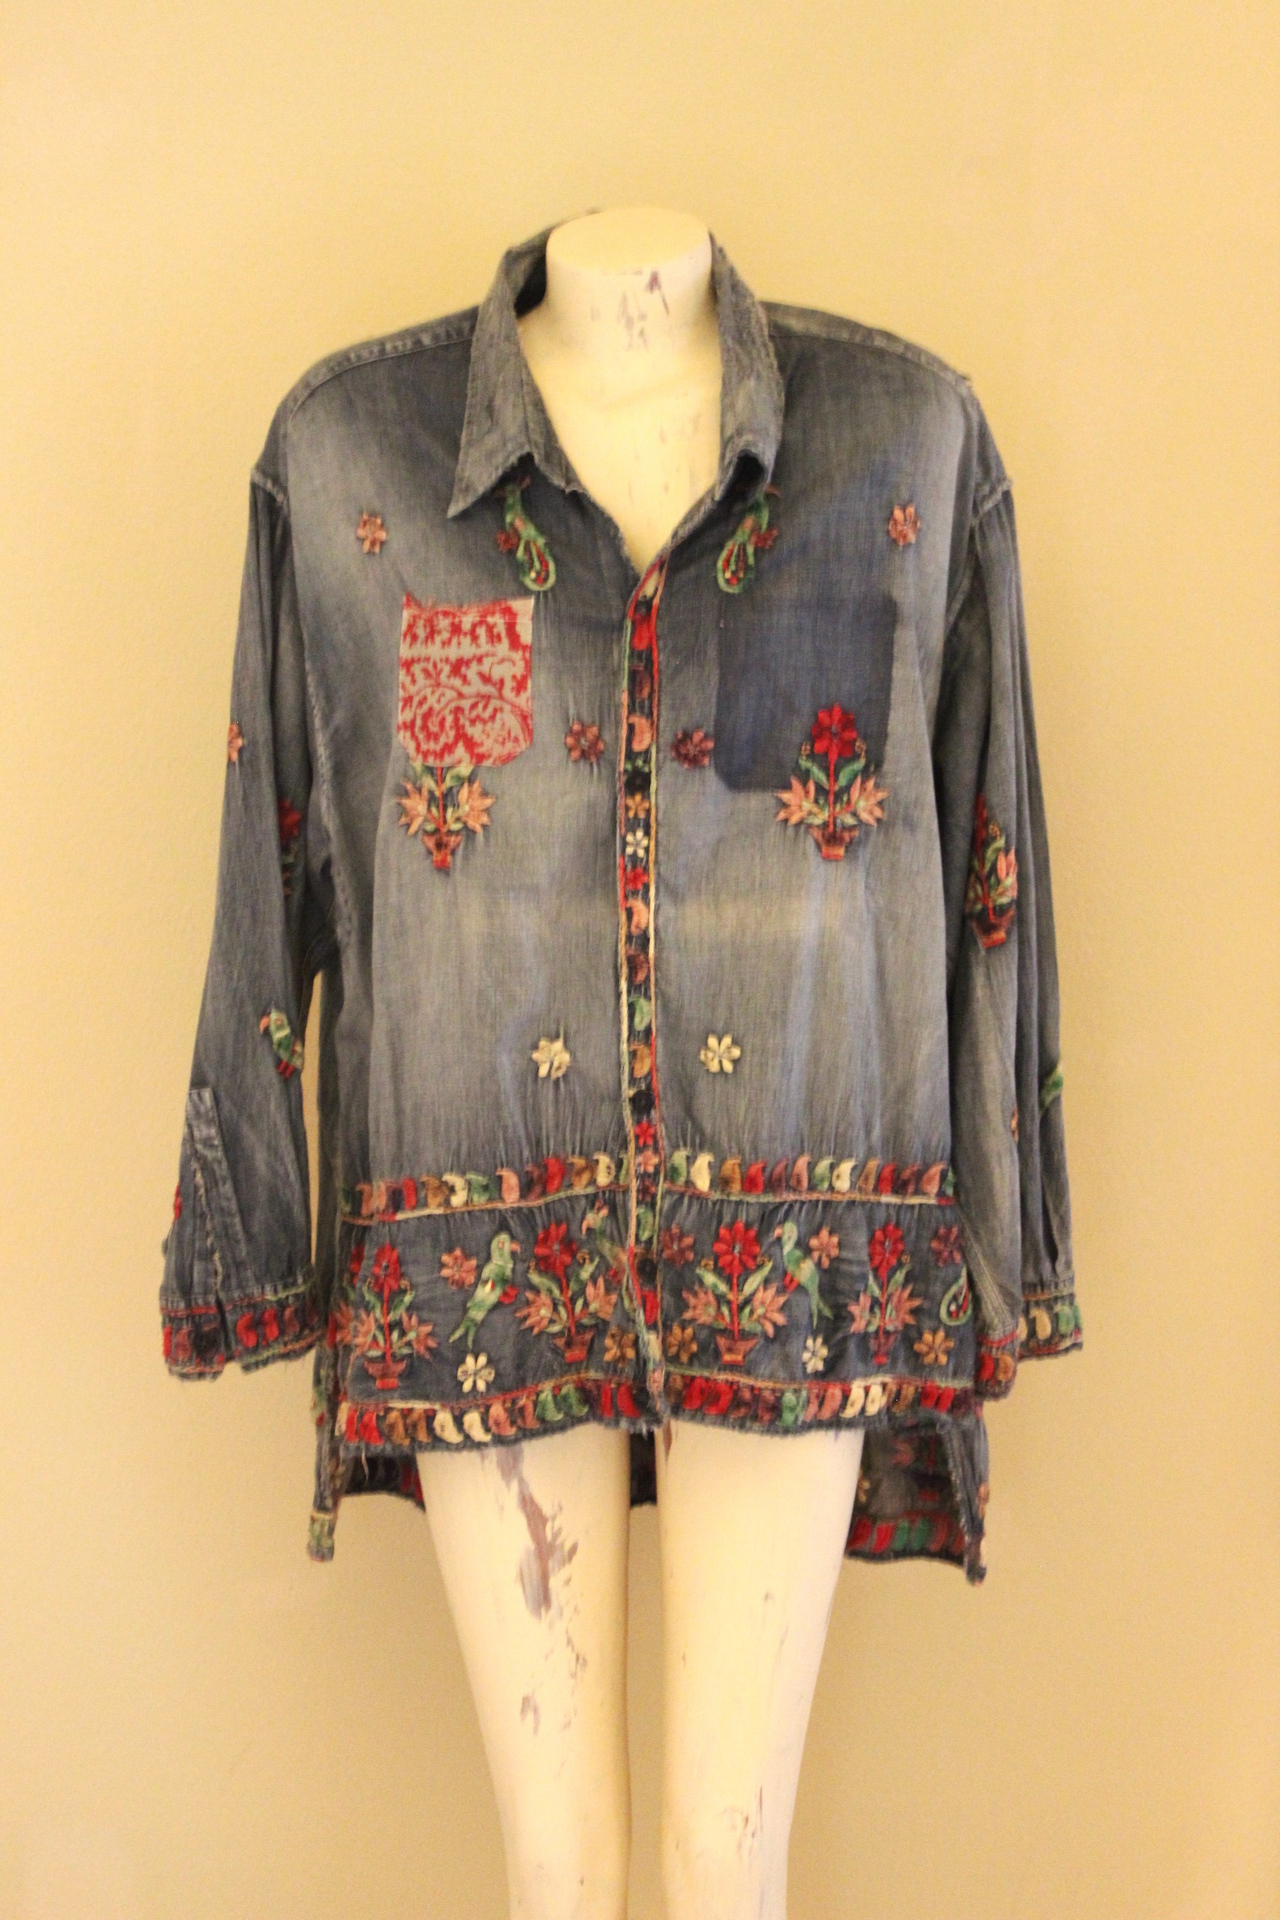 Magnolia Pearl Embroidered Sanforized Denim Shirt - long retired and rare!